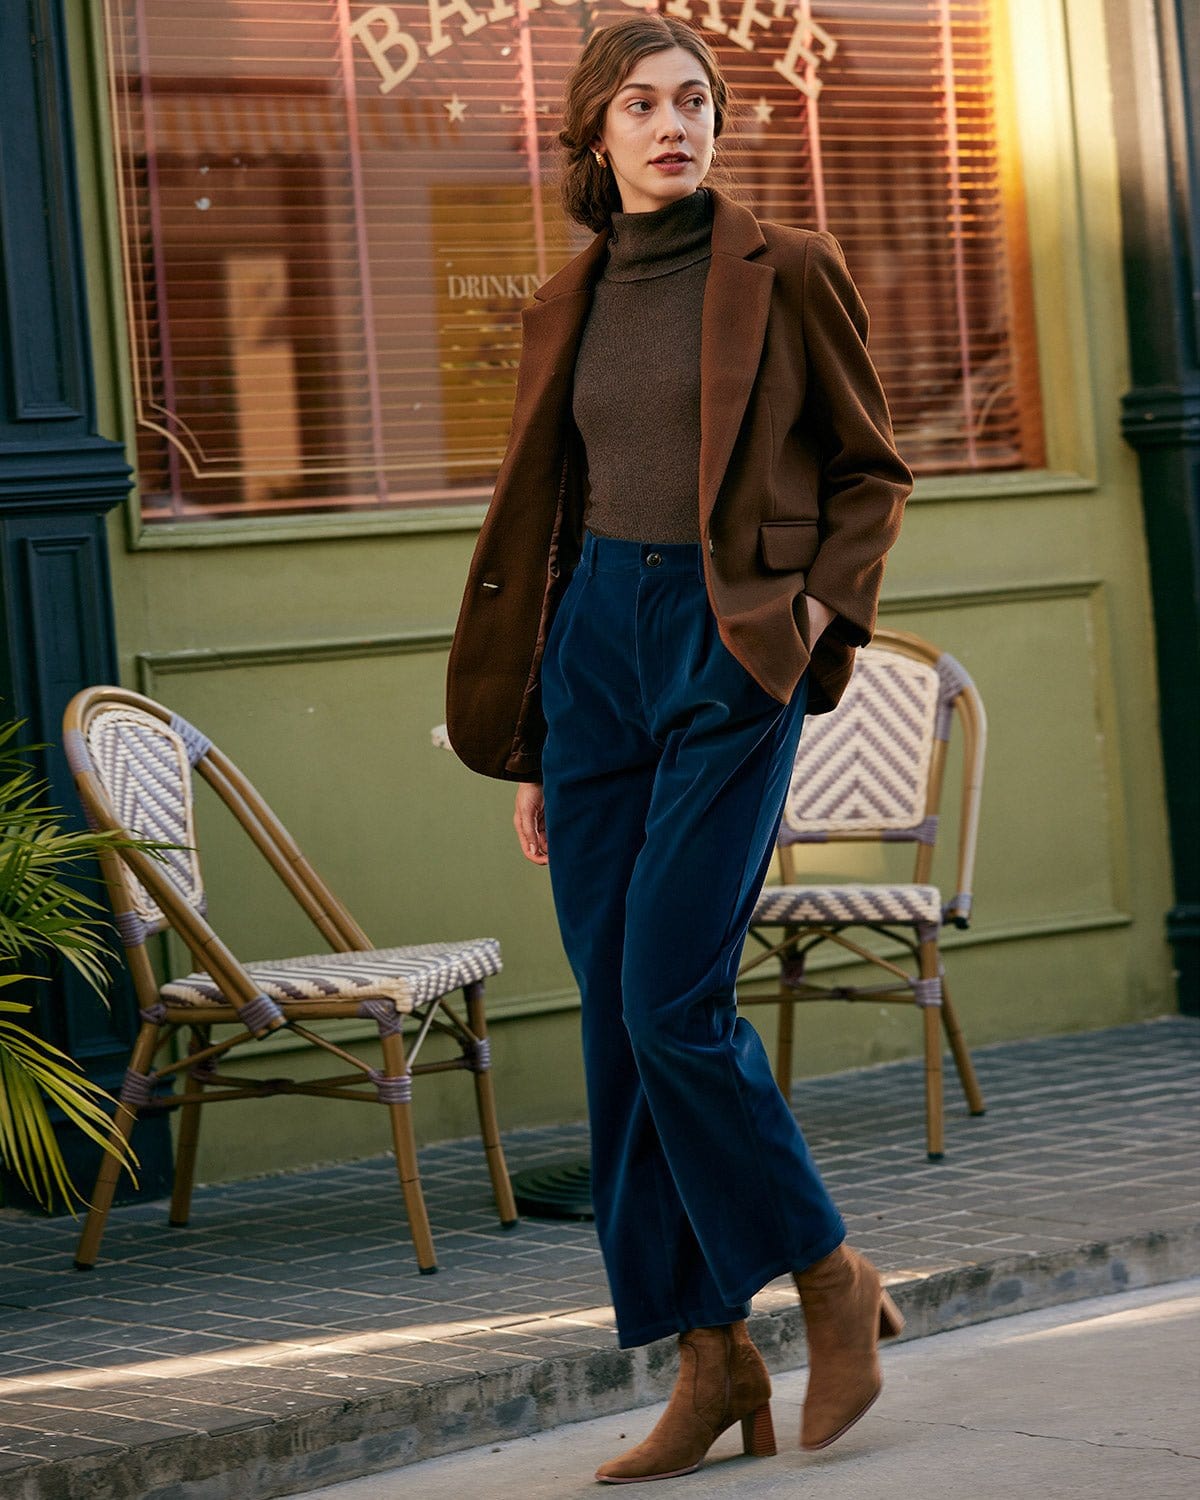 The Pleated Wide Leg Pants - High Waisted Wide Leg Pleated Belted Casual  Pants - Navy - Bottoms